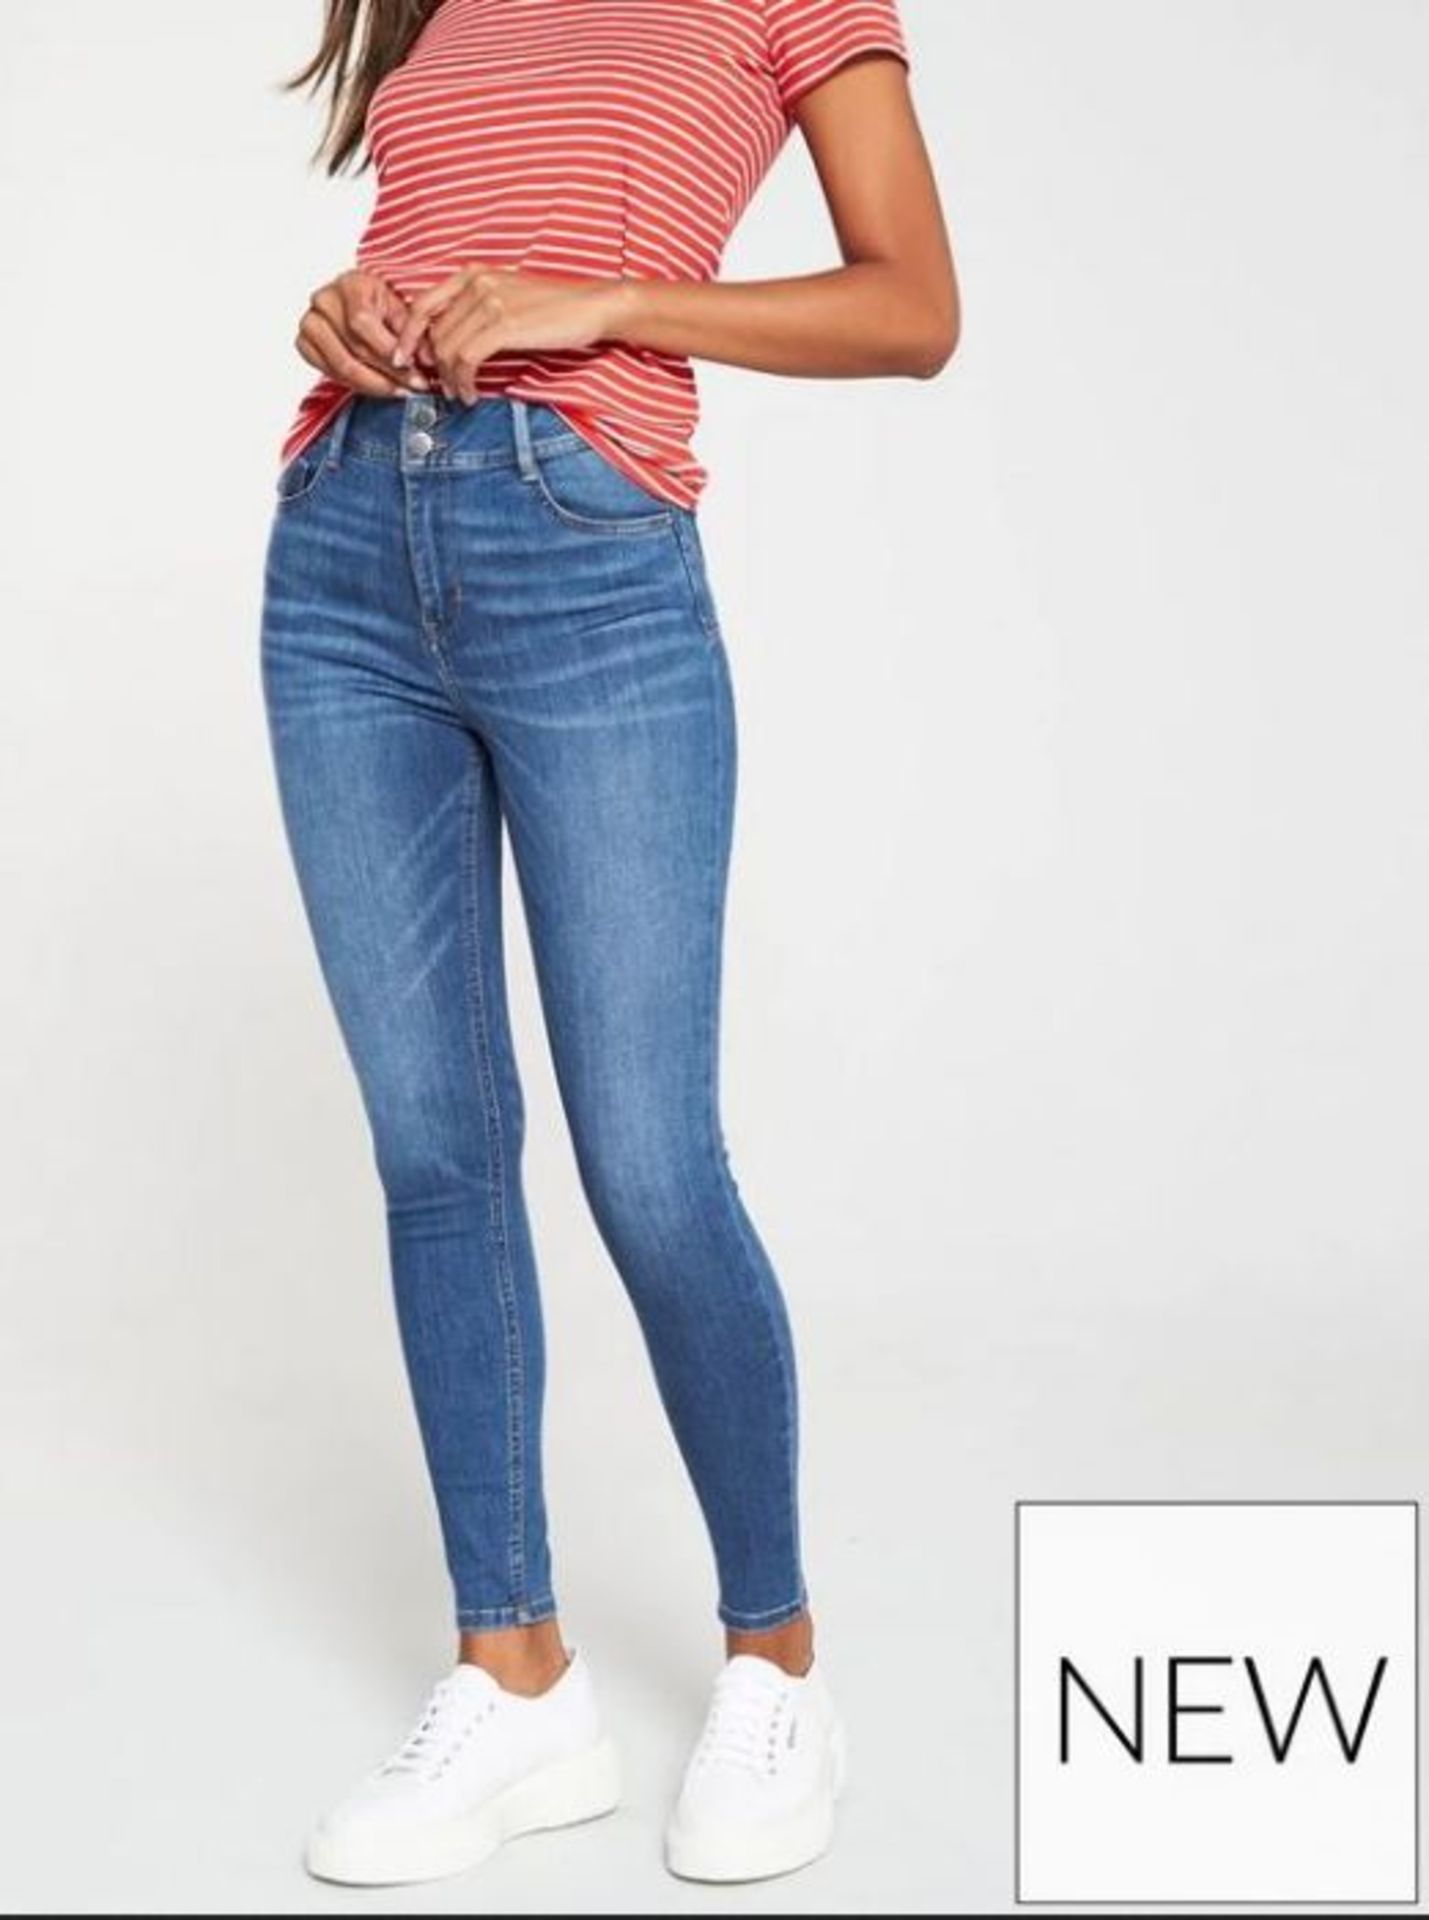 1 X V BY VERY SHAPING SKINNY JEANS DARK MIN - MID WASH / SIZE: 18 / RRP £30.00 / BRAND NEW WITH